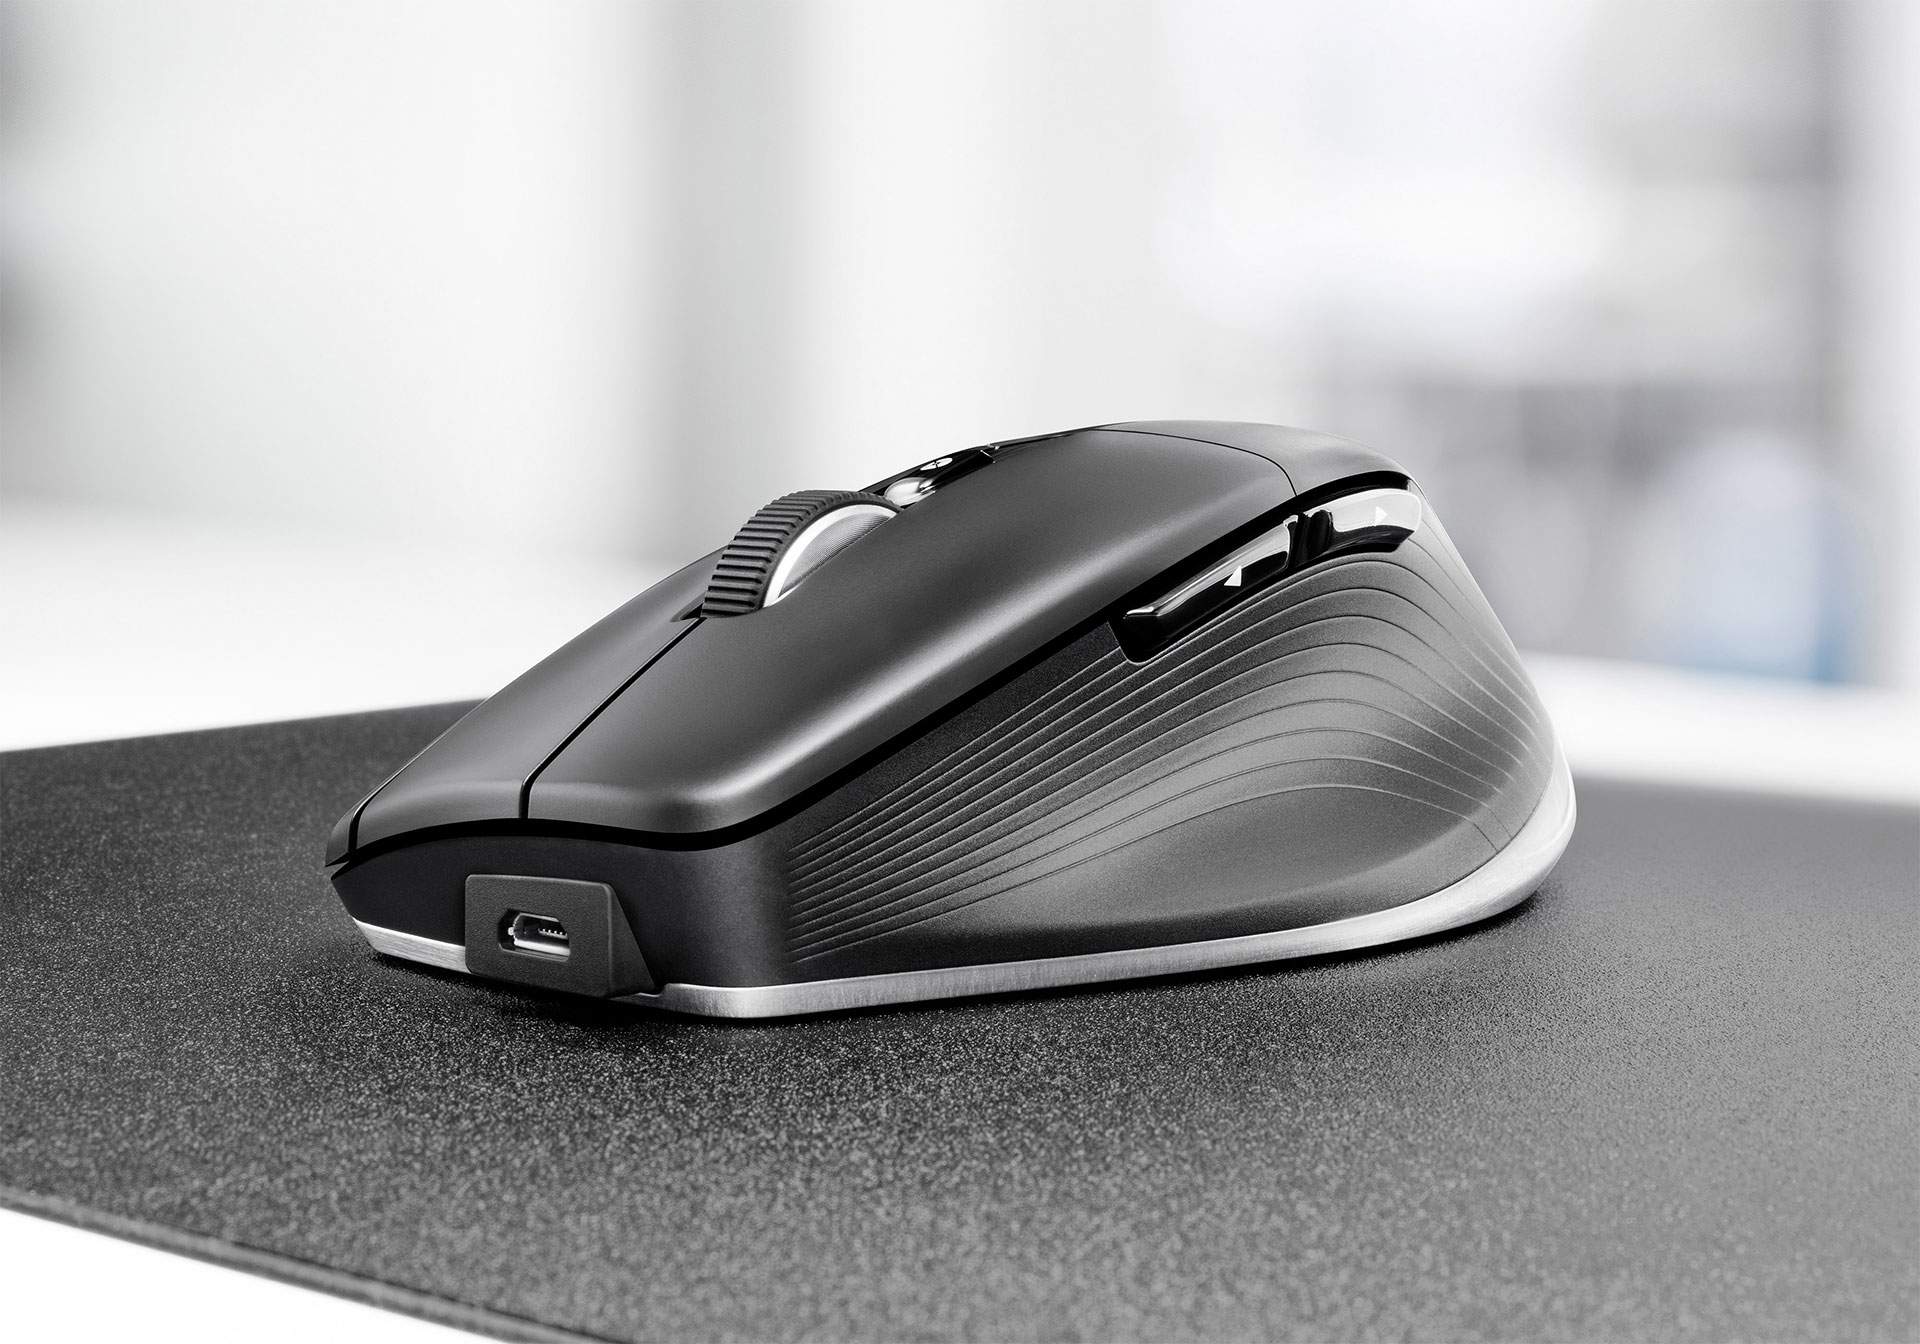 3Dconnection CadMouse Pro Wireless